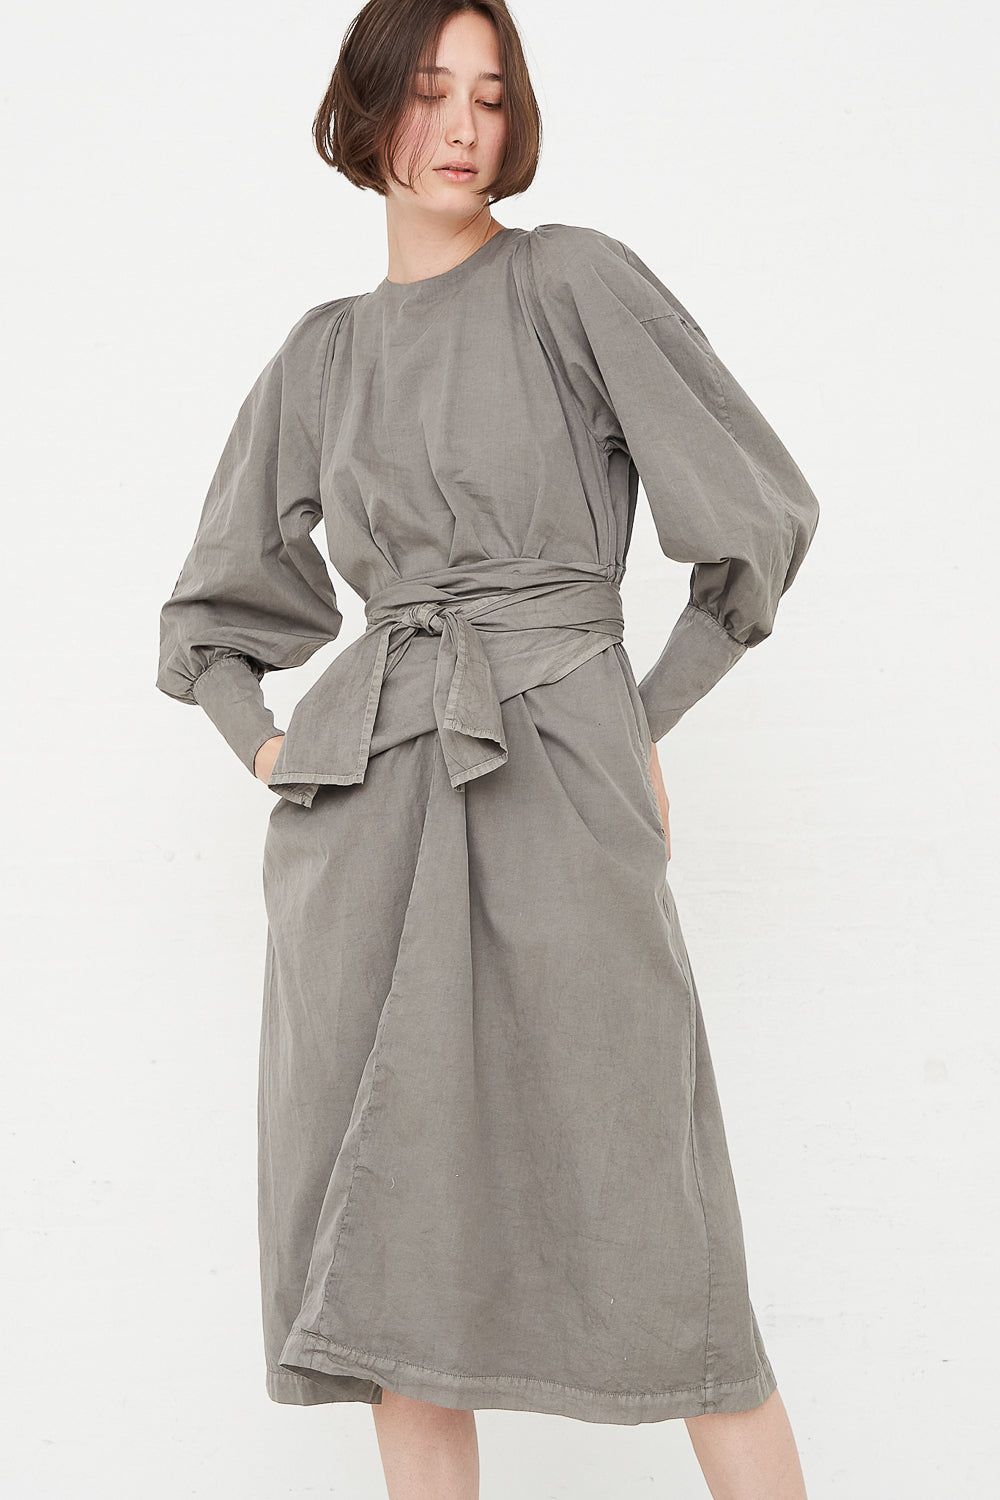 Cosmic Wonder - Suvin Cotton Broadcloth Wrapped Dress in Sumi front view